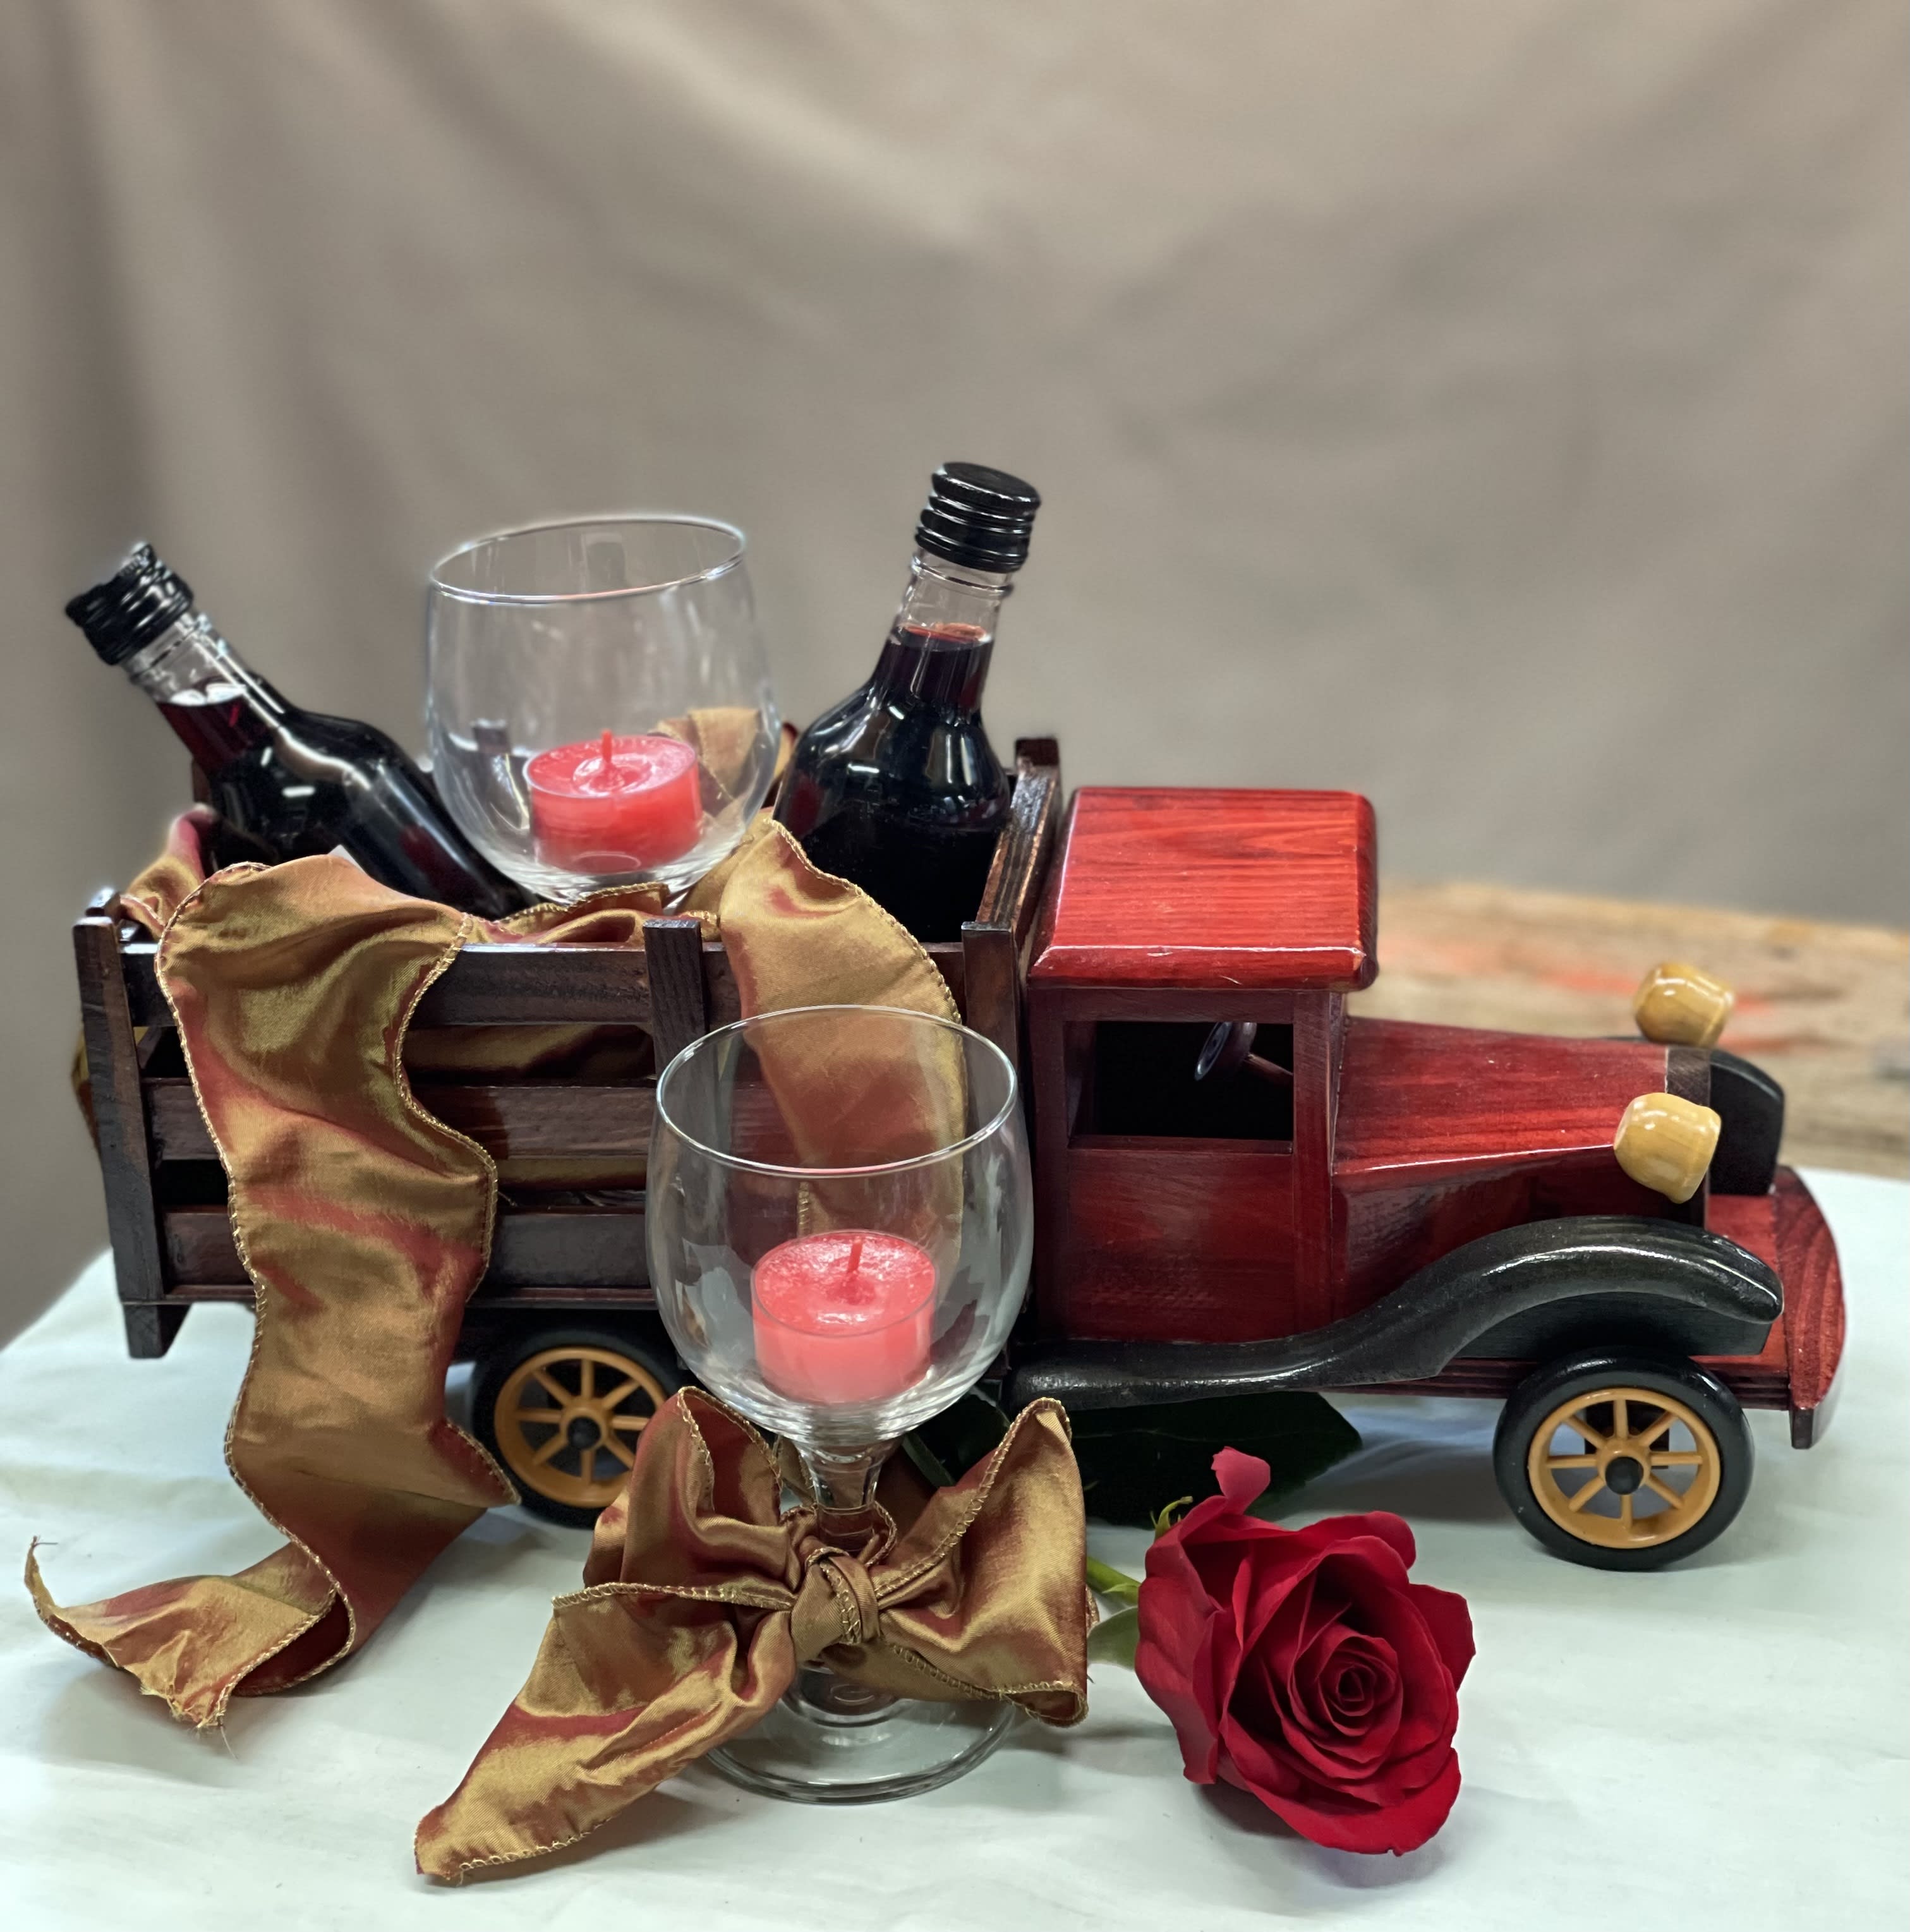 Only For Two - Cheers to our destination together. Included a Wooden Truck, 2 Wine Glass, 9 Scented Tealight, single red rose. 